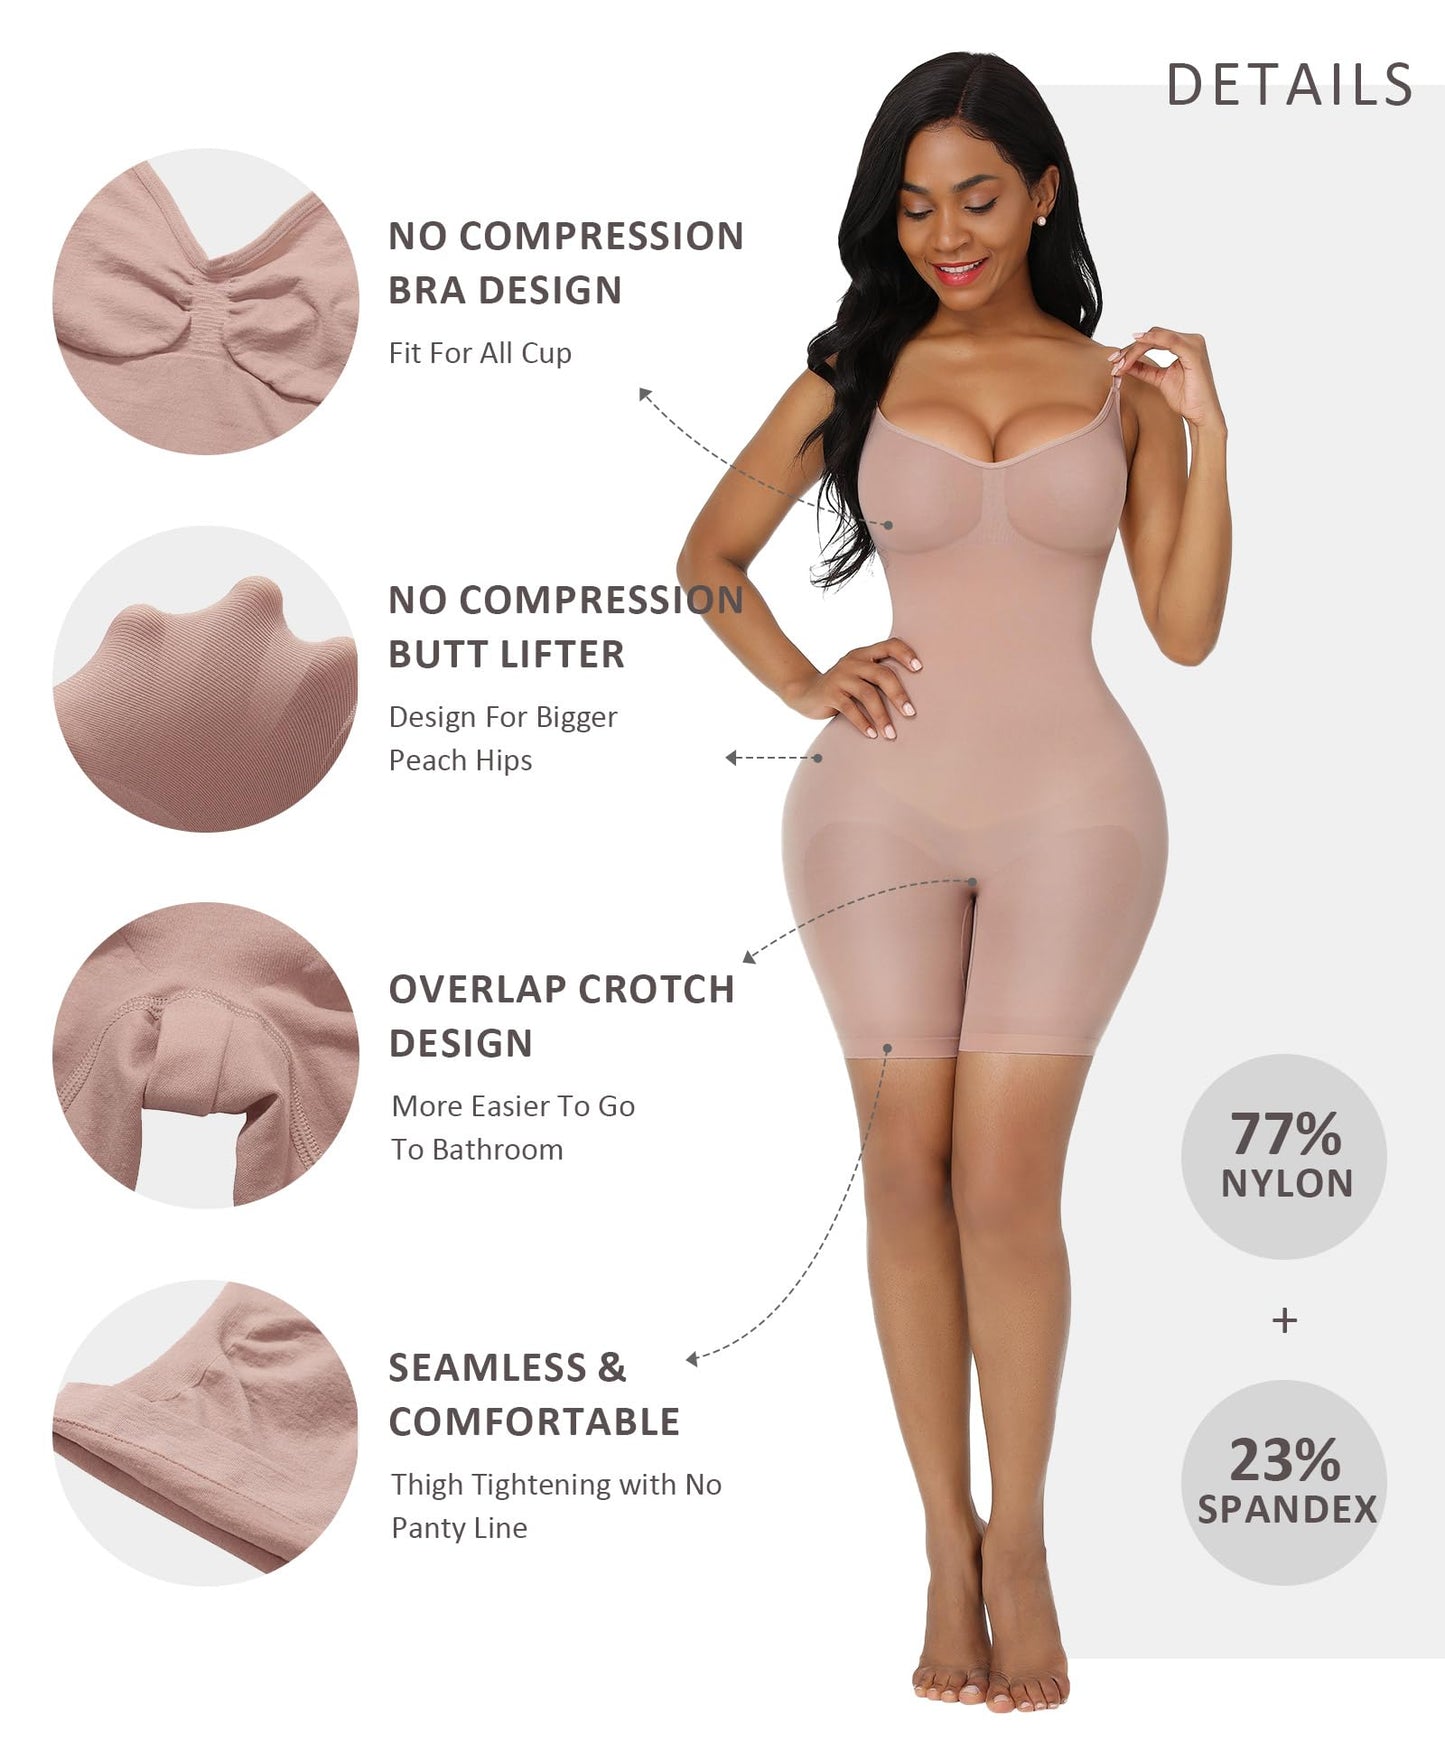 FeelinGirl Seamless Butt Lifter Shapewear Bodysuit with Firm Control and High Waist for Dresses, XS/S